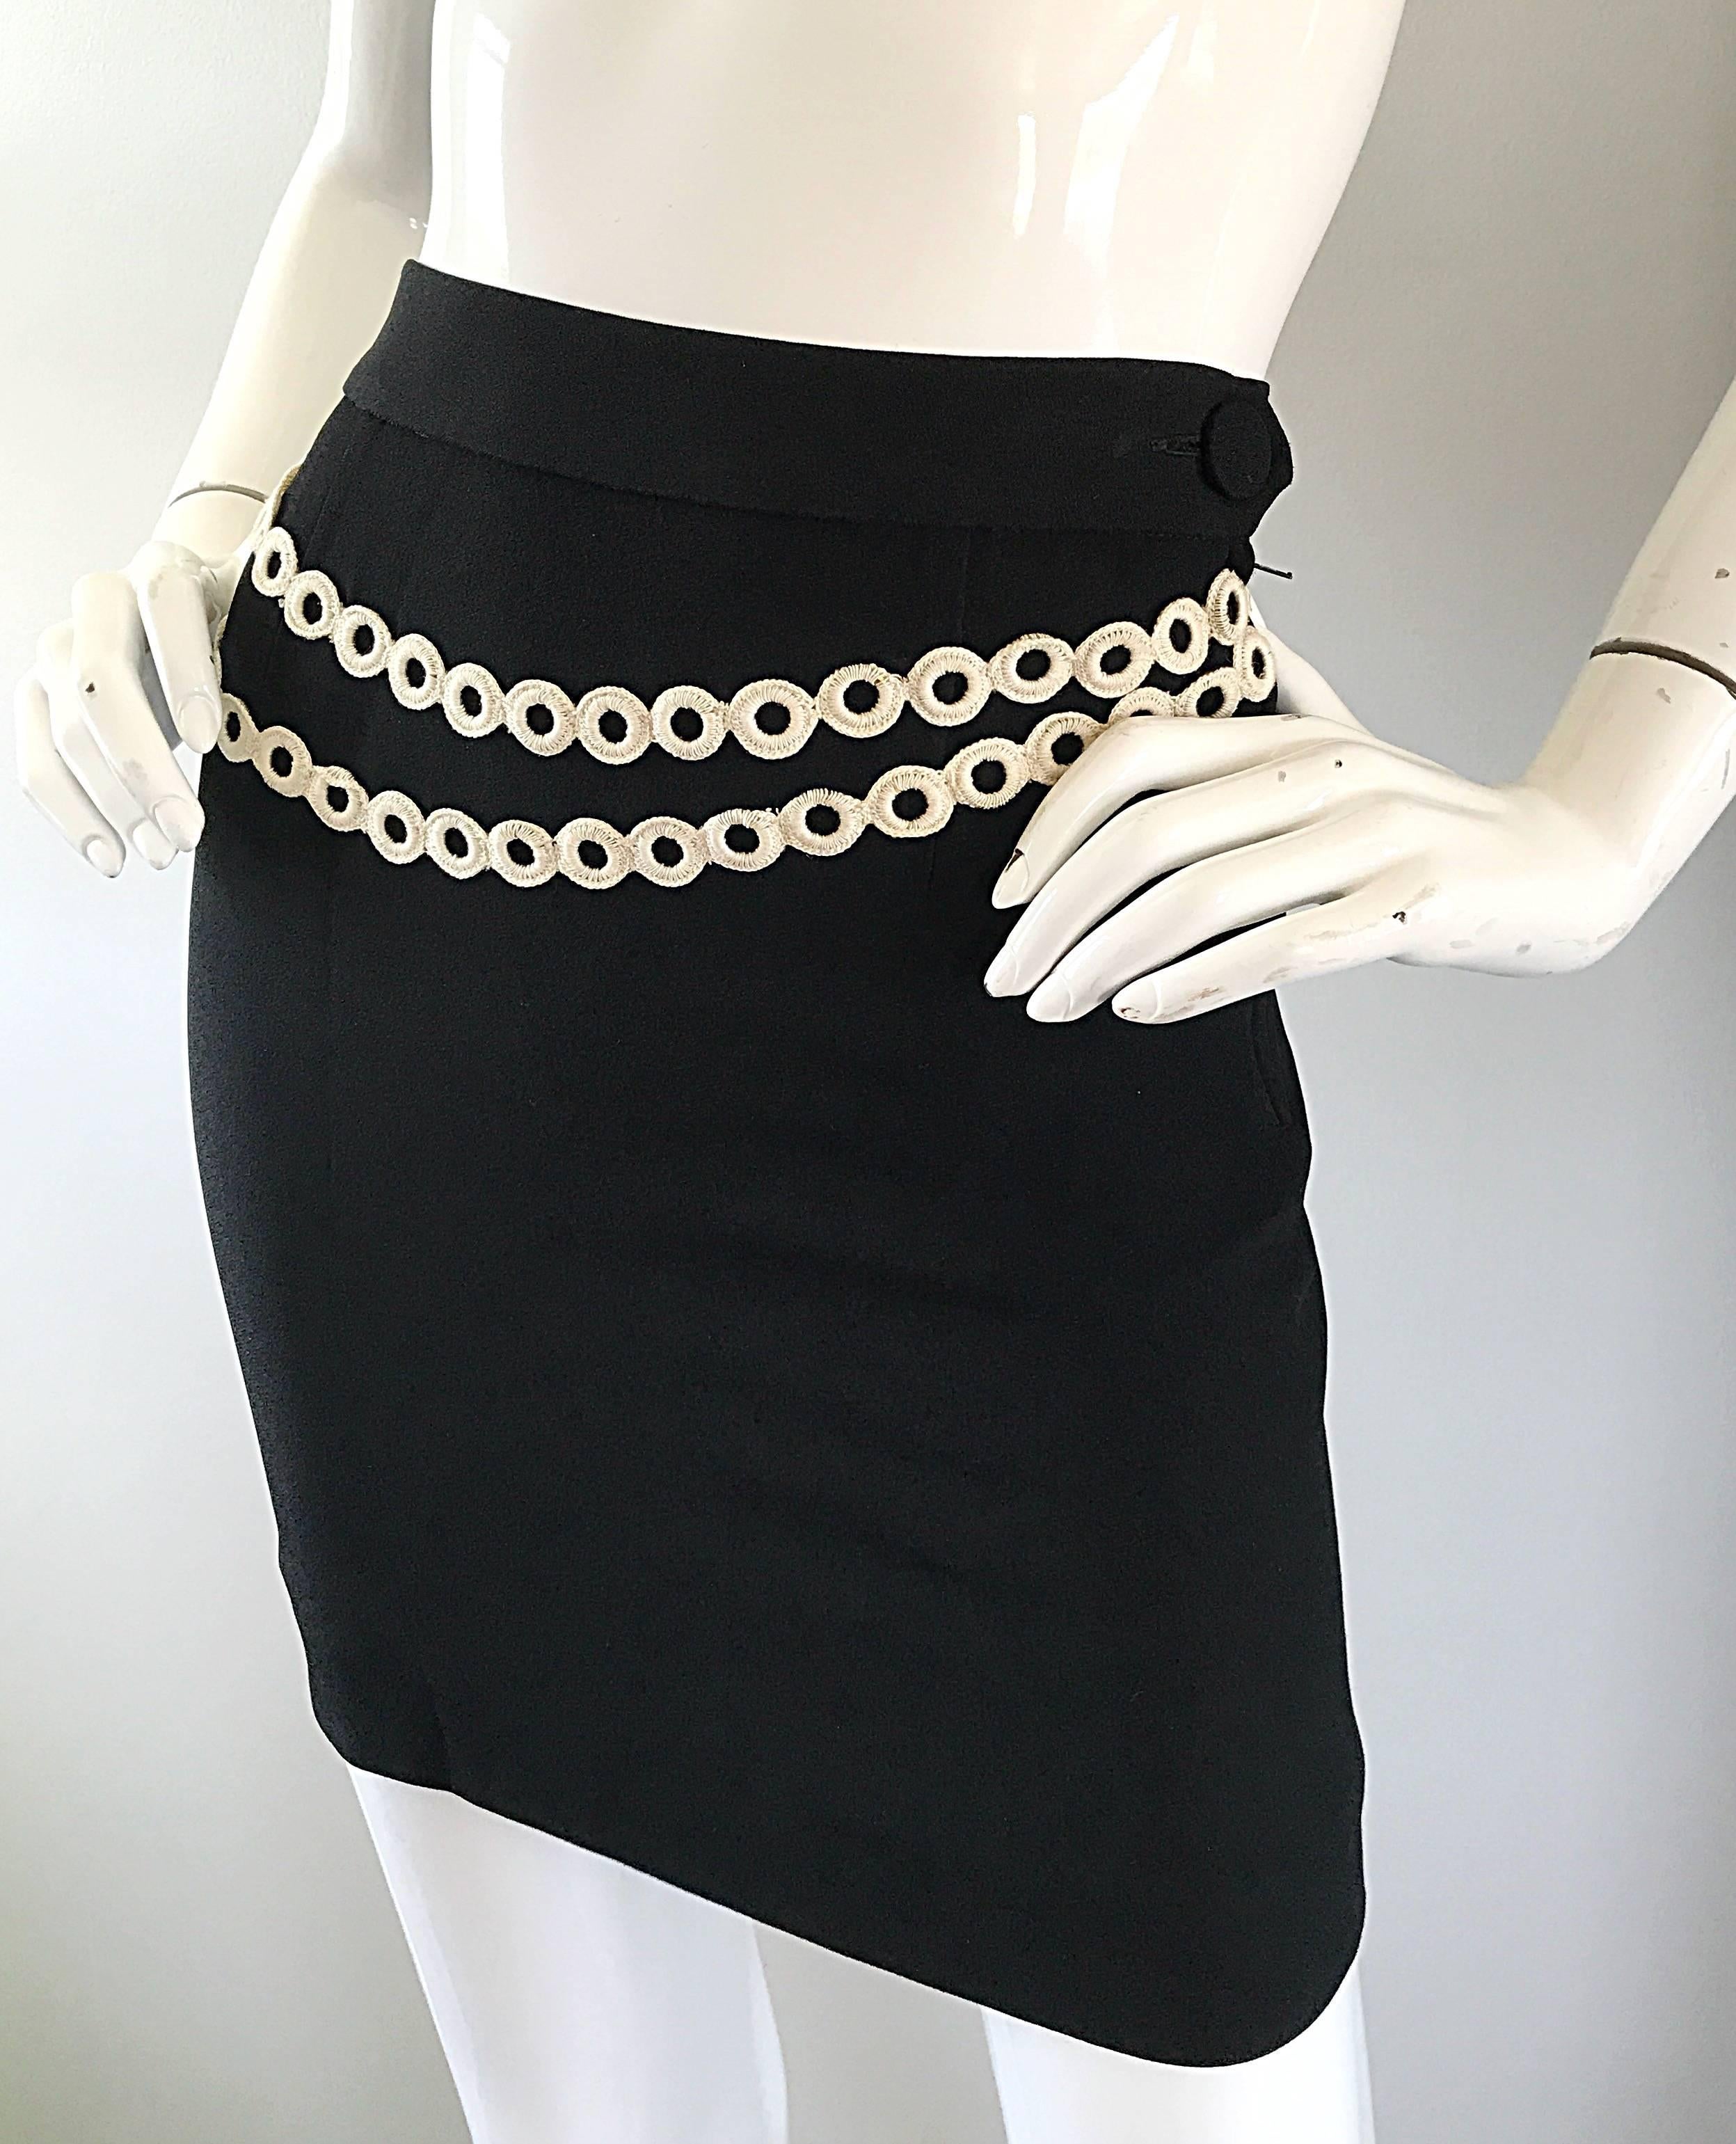 1990s Moschino Cheap and Chic Black and White Trompe l'oeil Vintage Mini Skirt In Excellent Condition For Sale In San Diego, CA